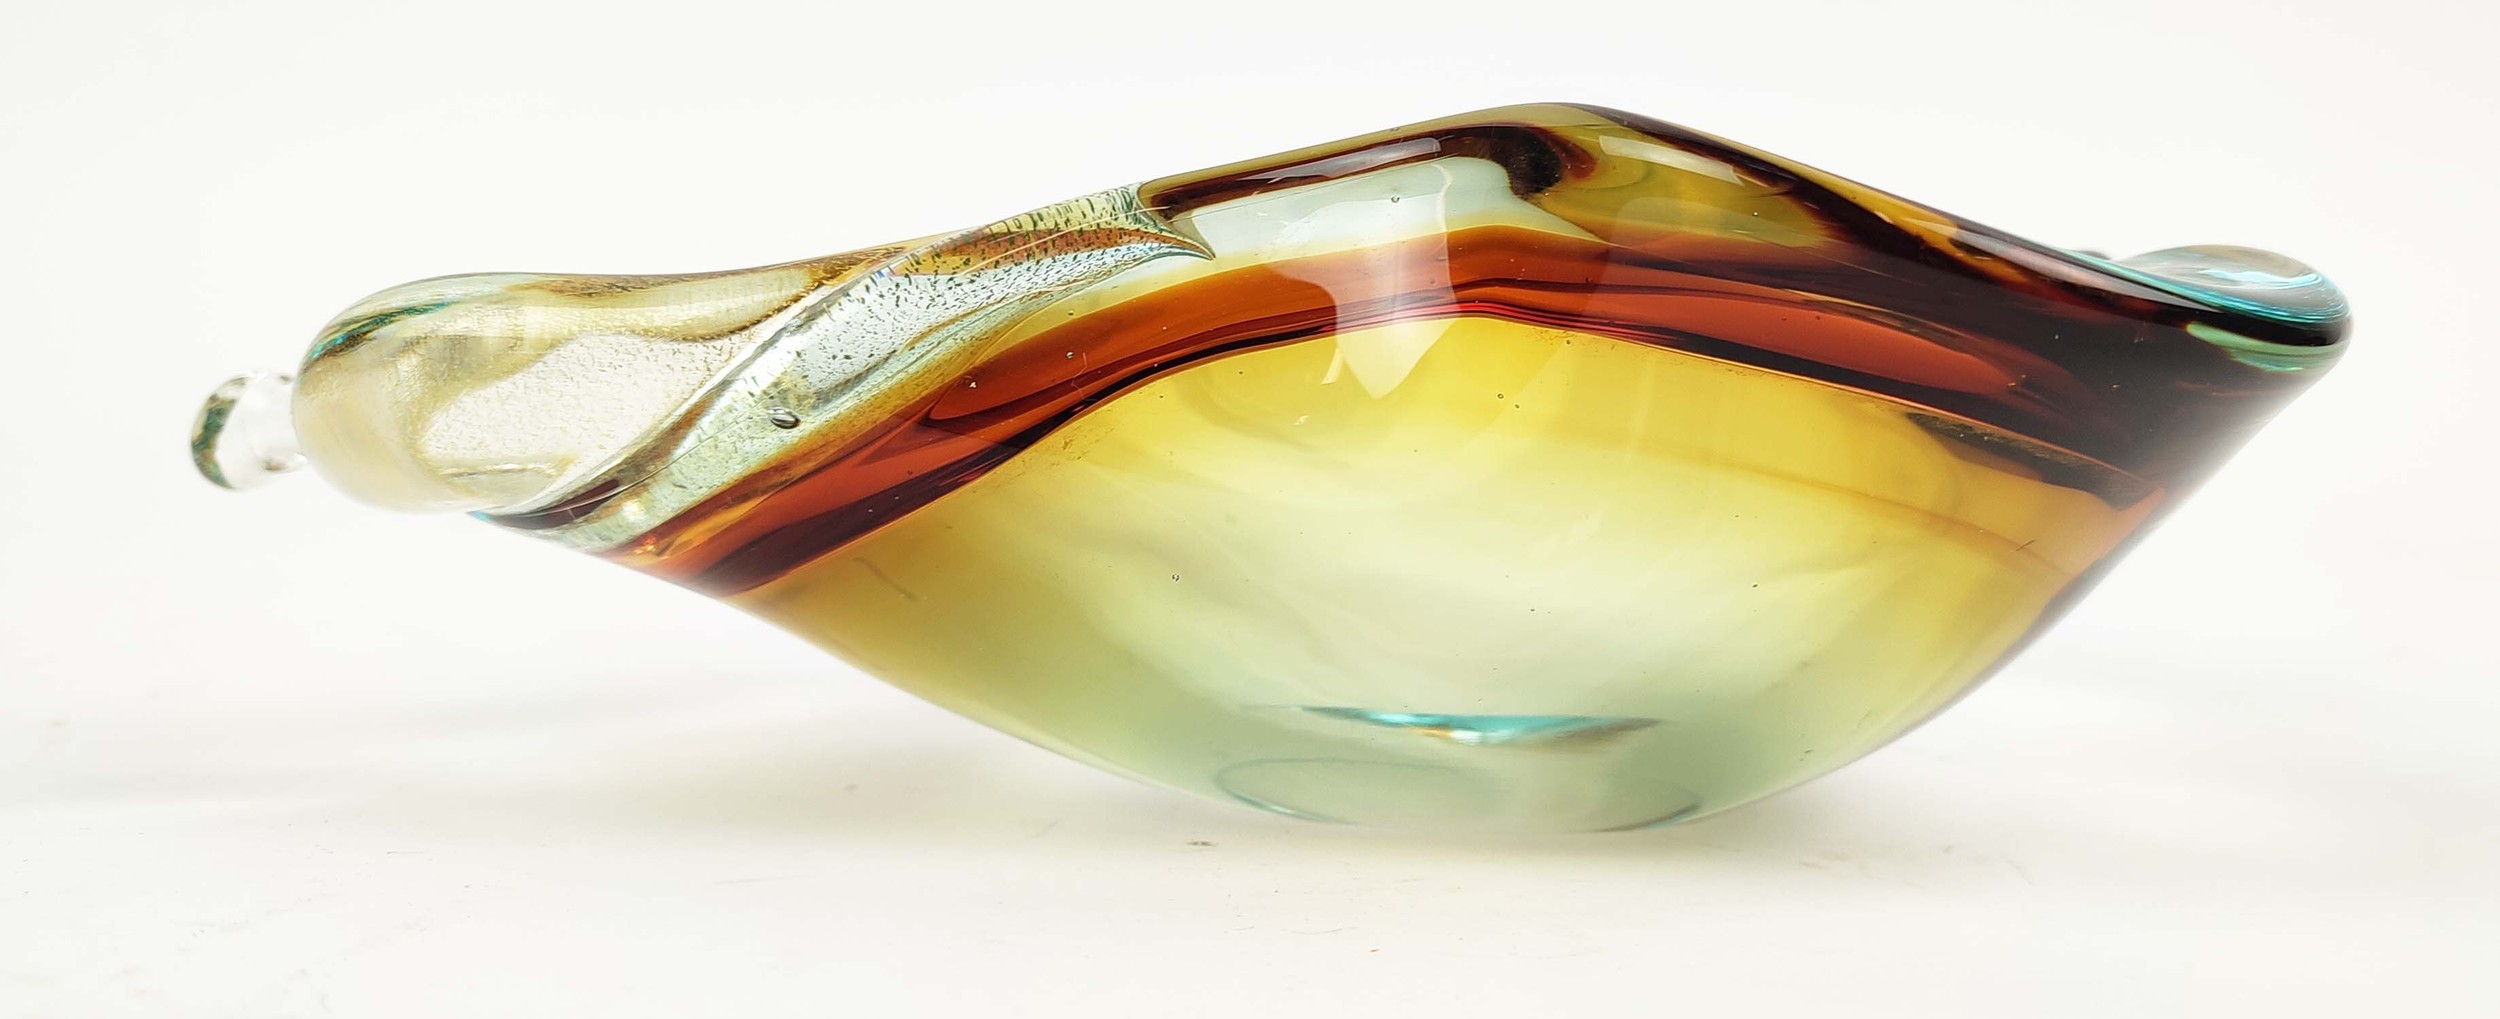 A MURANO GLASS BOWL, in the form of a pear, in amber and teal colourway, polished base, probably - Image 5 of 5